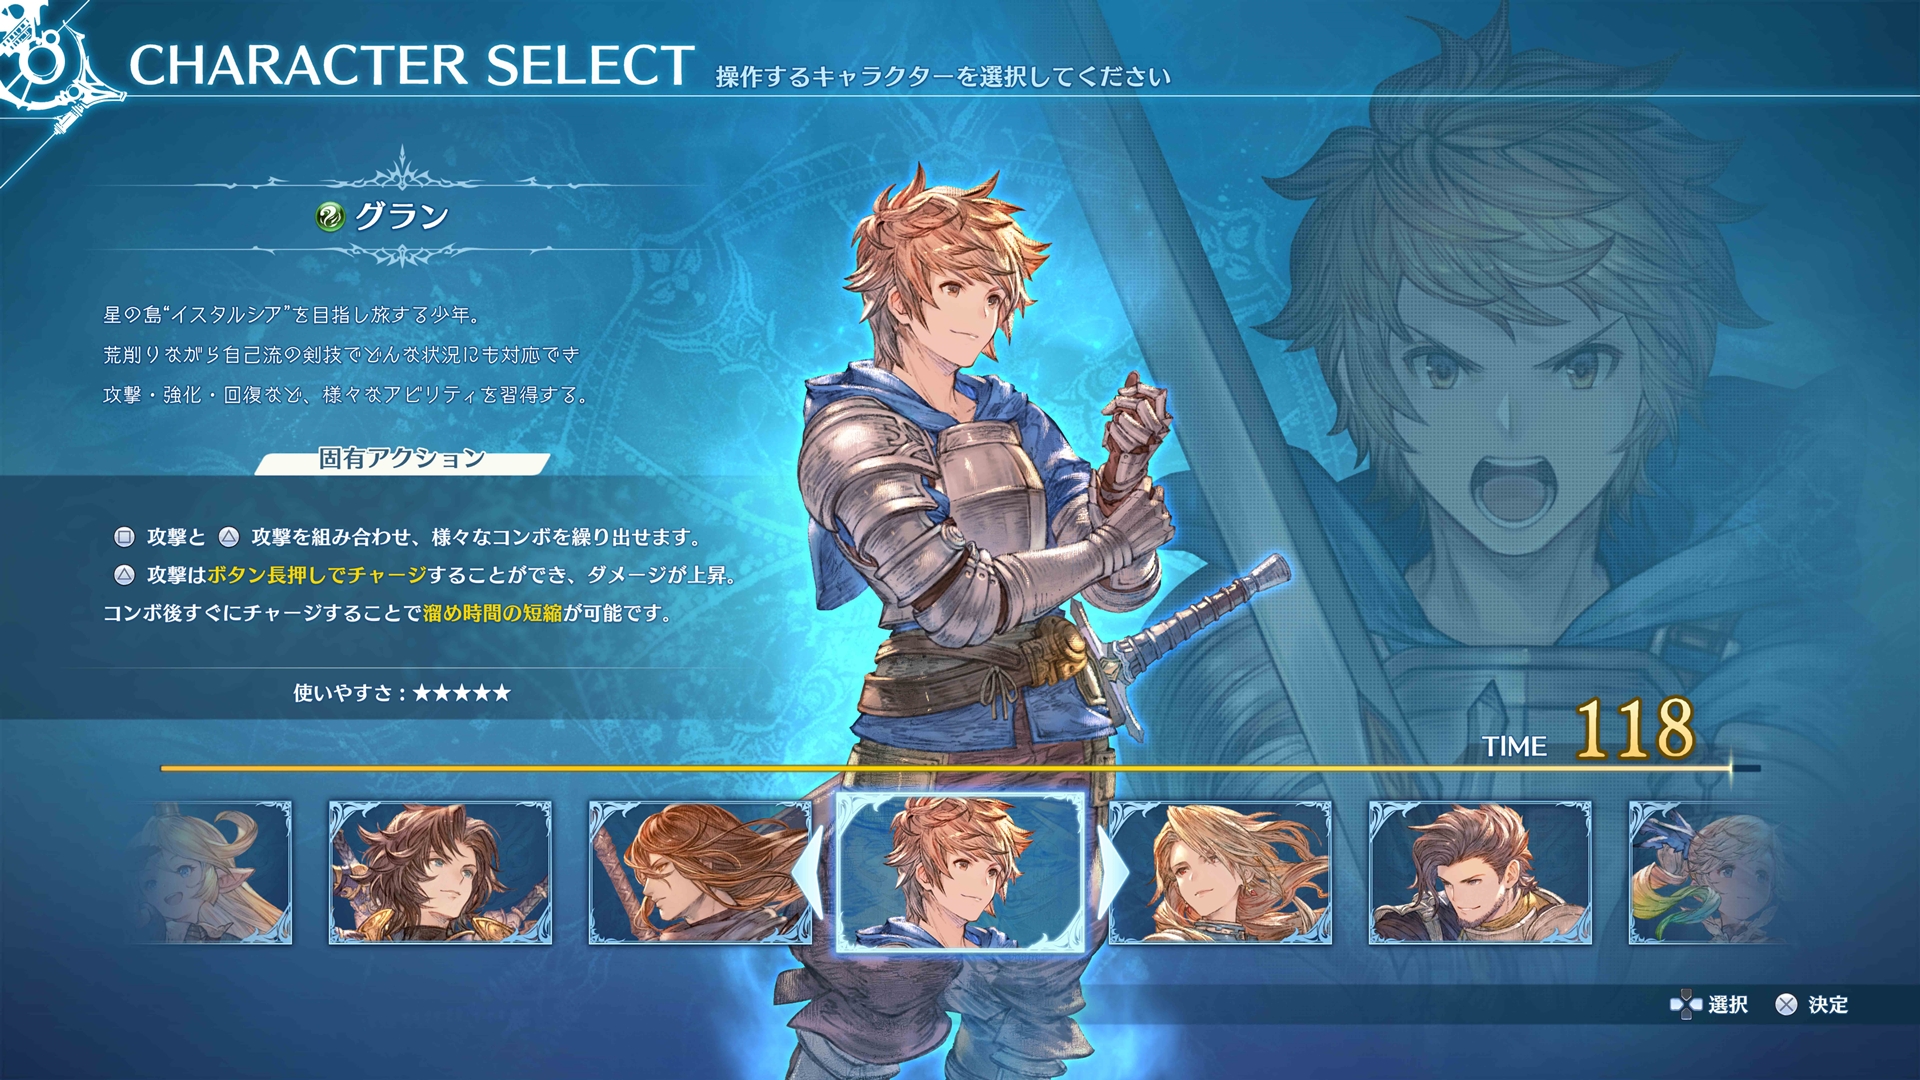 6 Characters We Hope to See in Granblue Fantasy: Relink